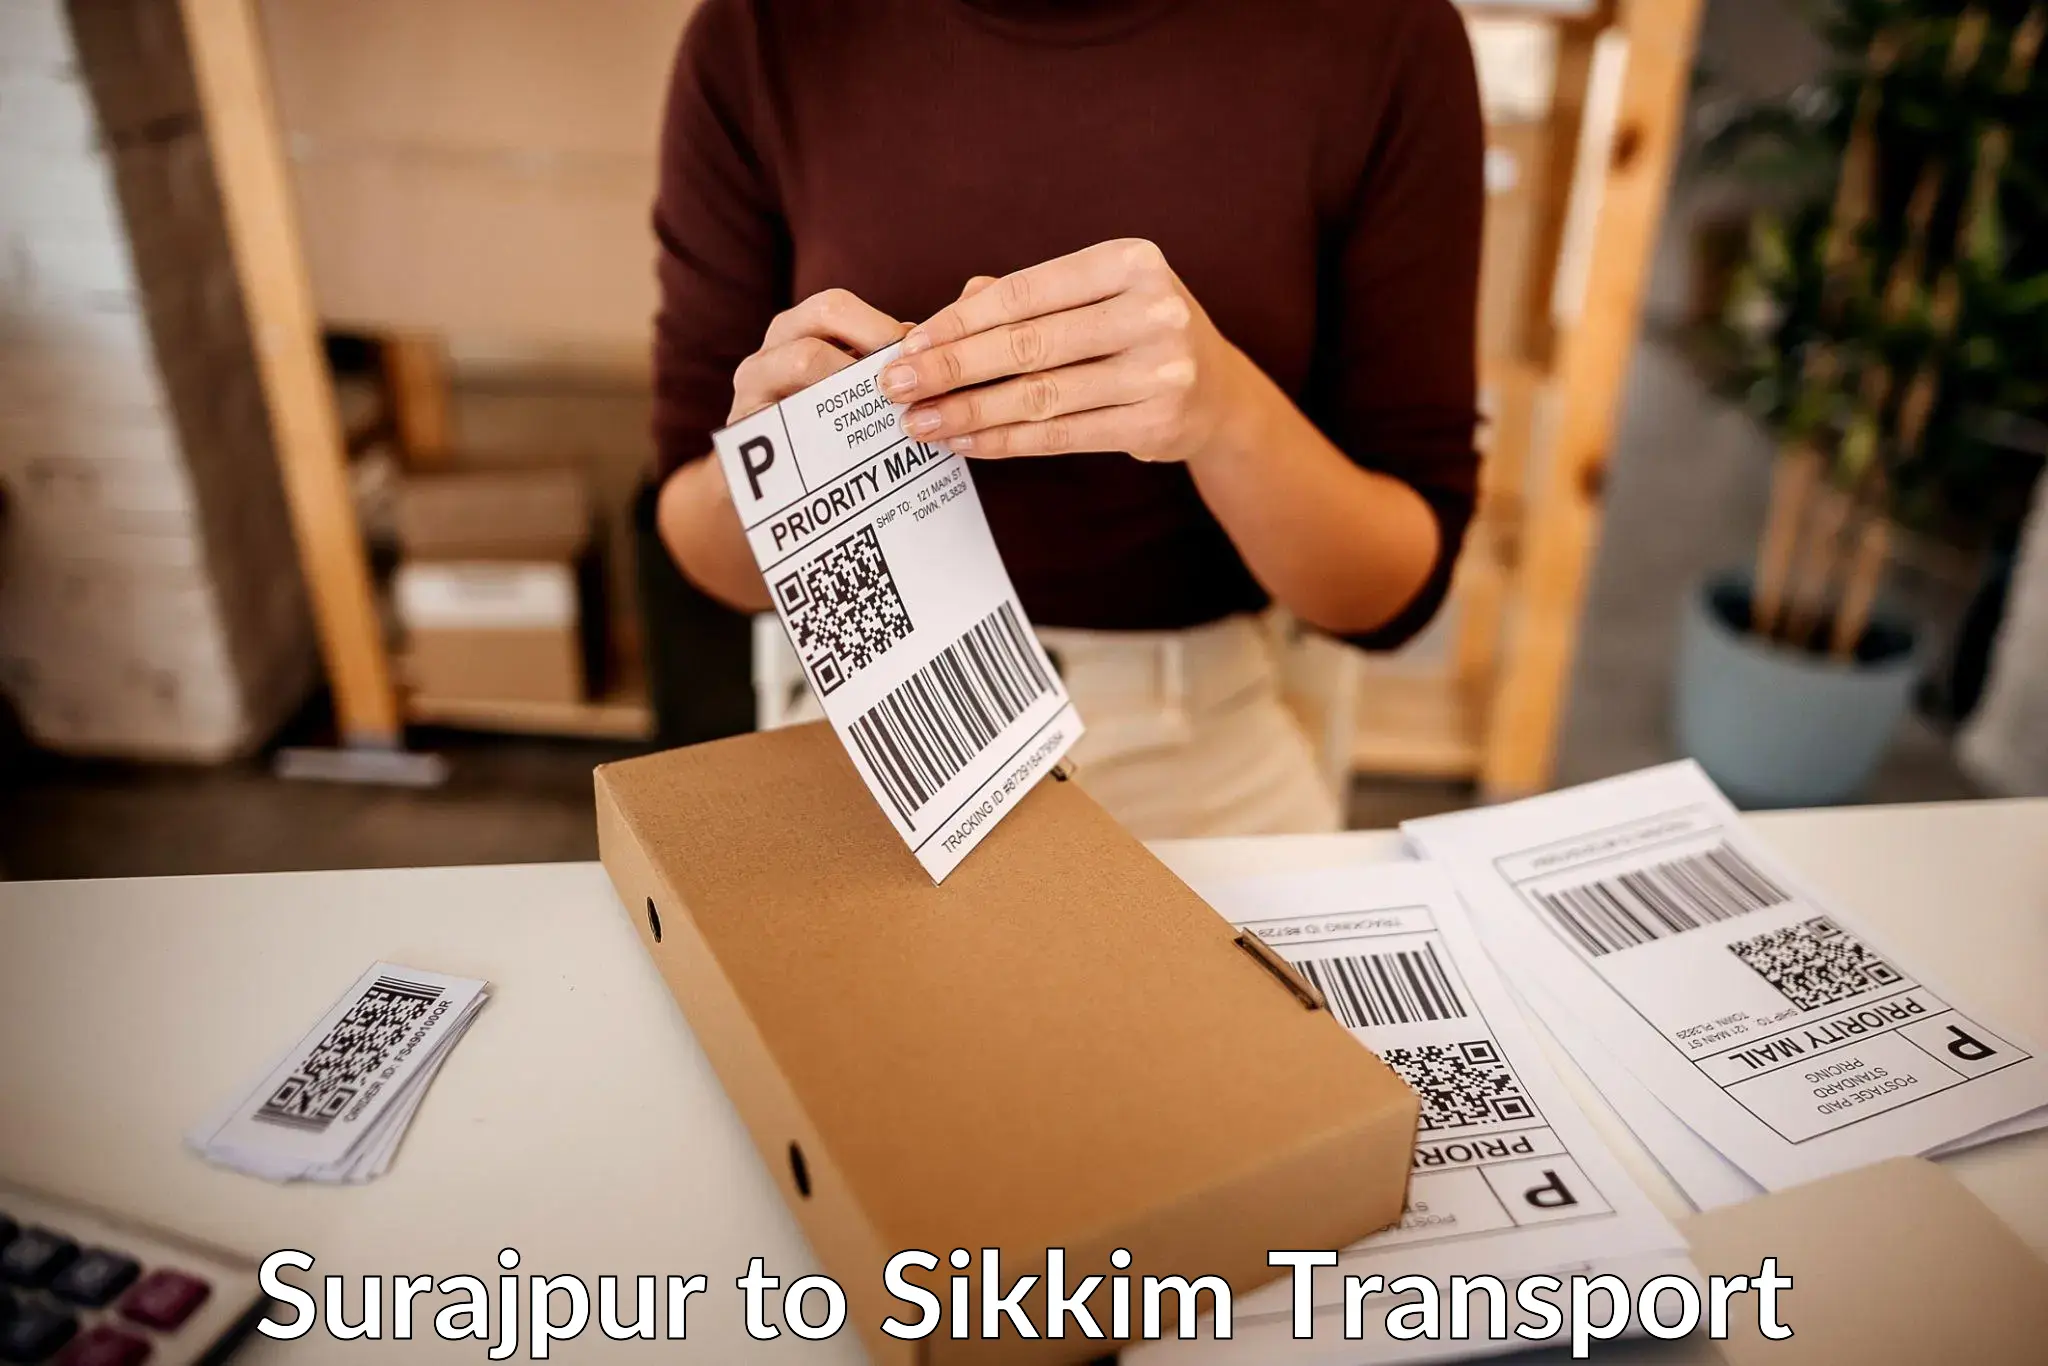 Container transport service Surajpur to Pelling